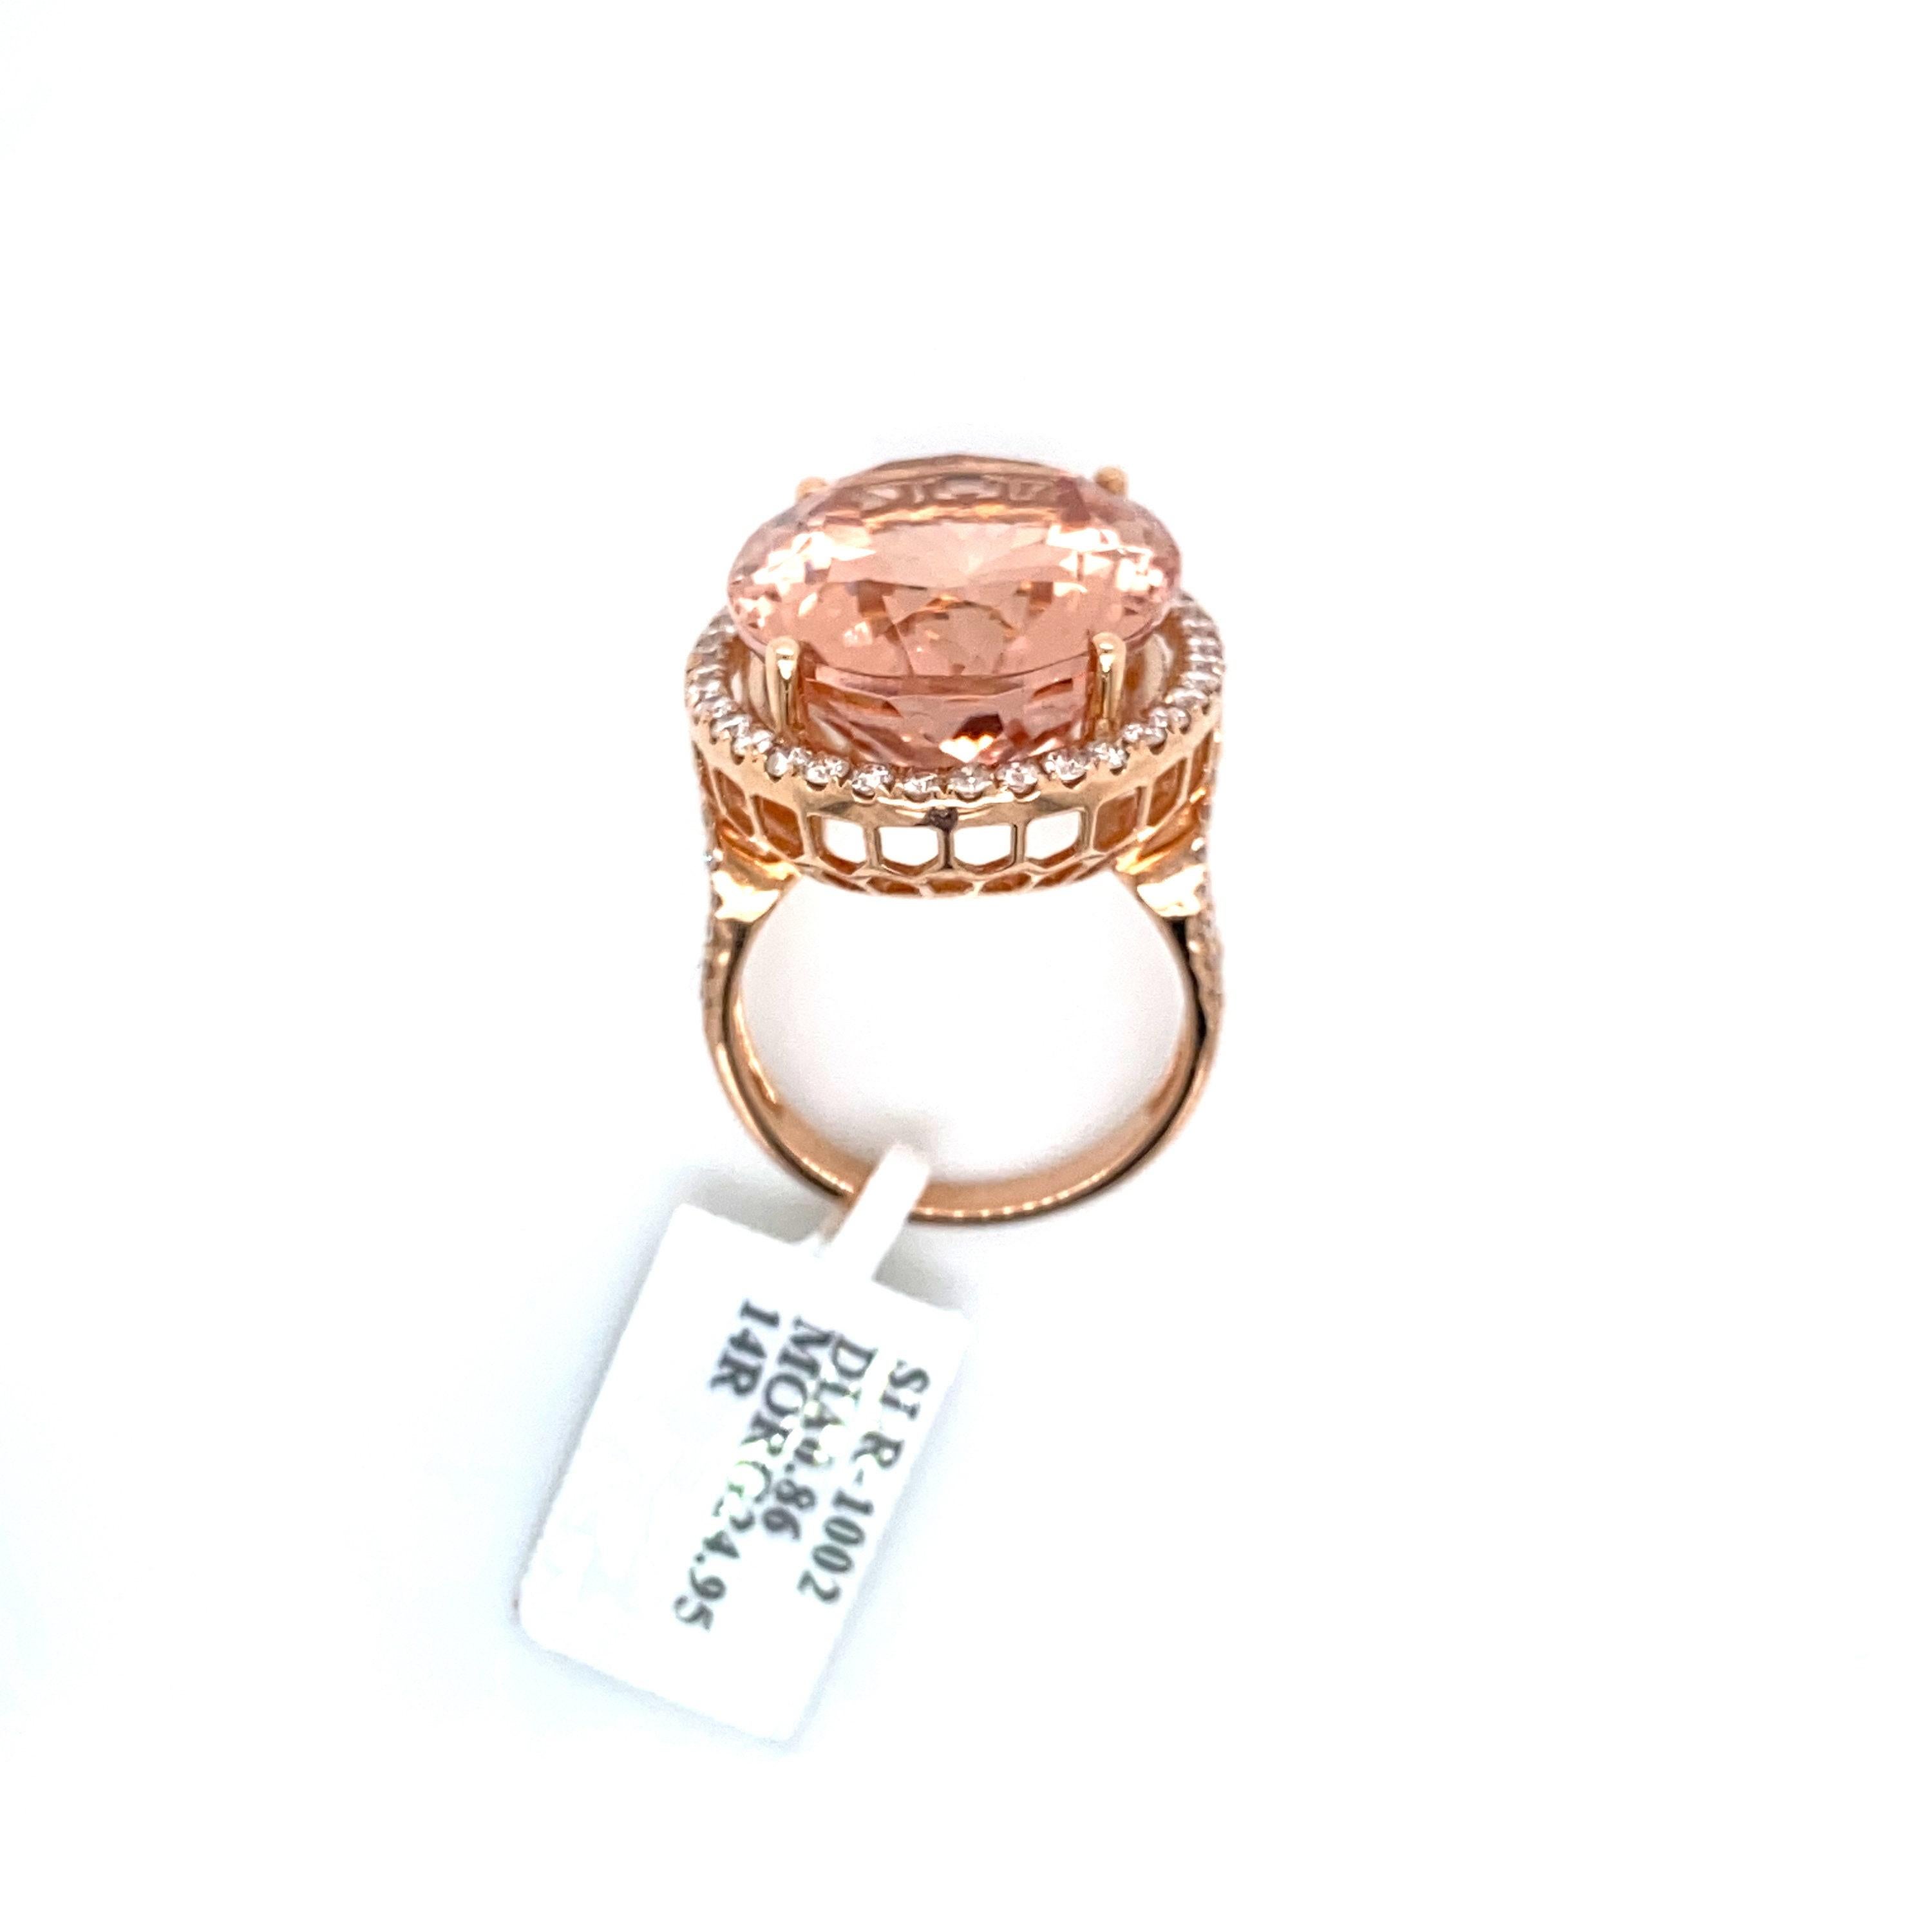 This is a magnificent natural morganite and diamond cocktail ring set in solid 14K rose gold. The natural 20X17MM 24.95ct morganite oval has an excellent peachy pink color and is set on top of a gorgeous diamond encrusted shank. The ring is stamped